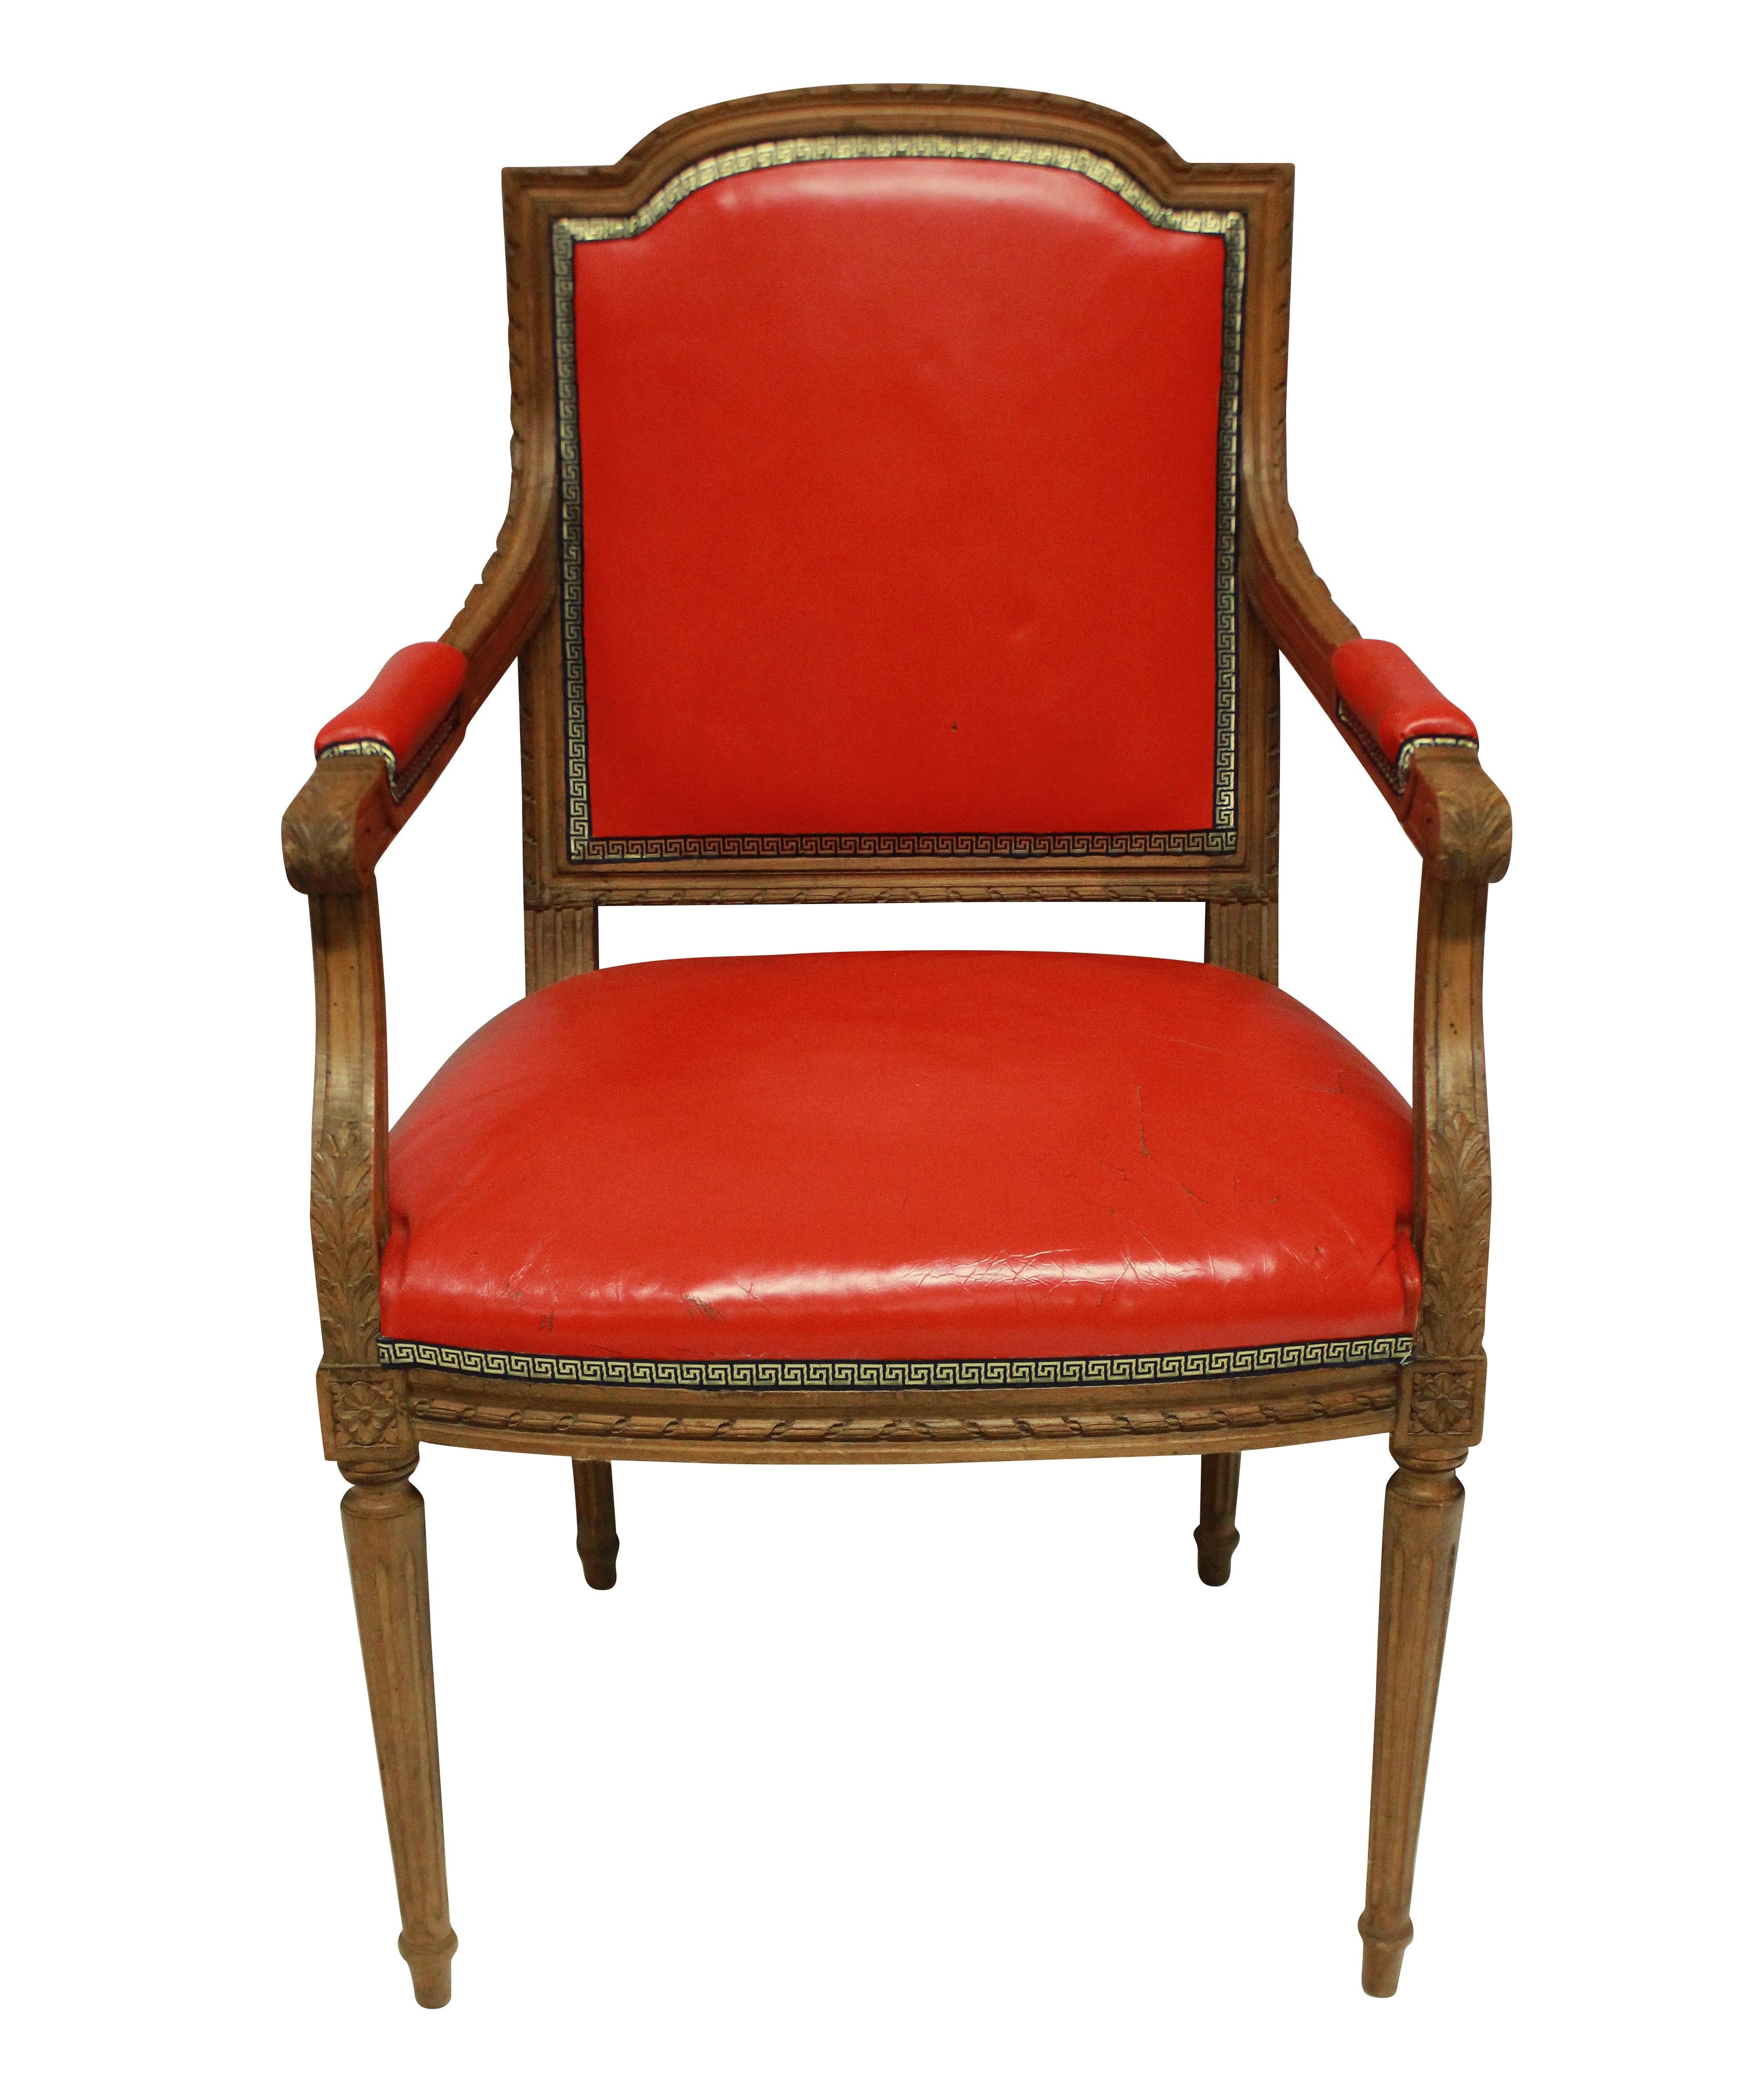 A Louis XVI style armchair in oak, upholstered in tomato red leather, with a blue and gold Greek key trim.